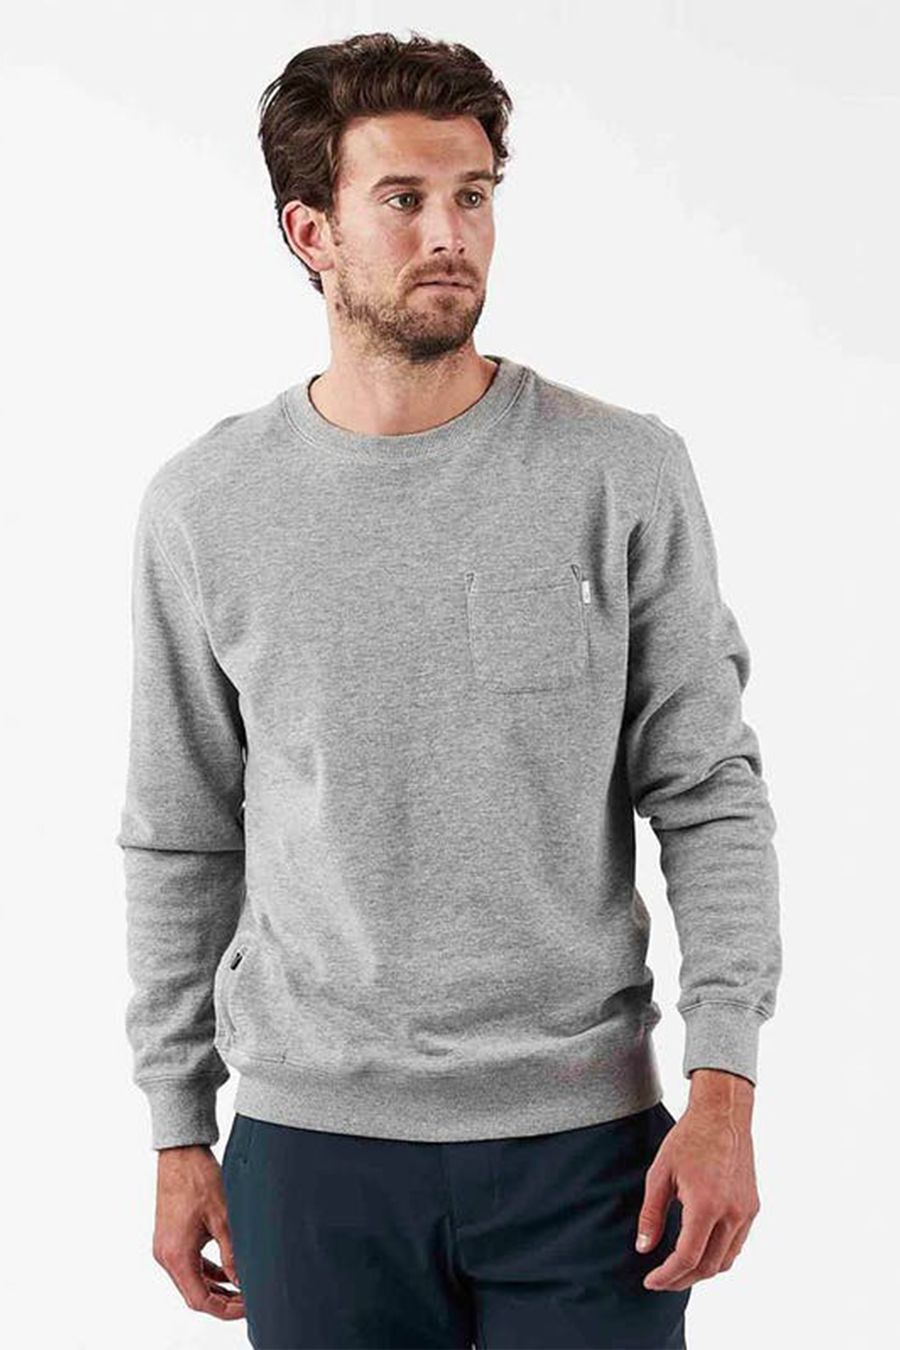 Jeffreys Pullover | Heather Grey - Main Image Number 1 of 3